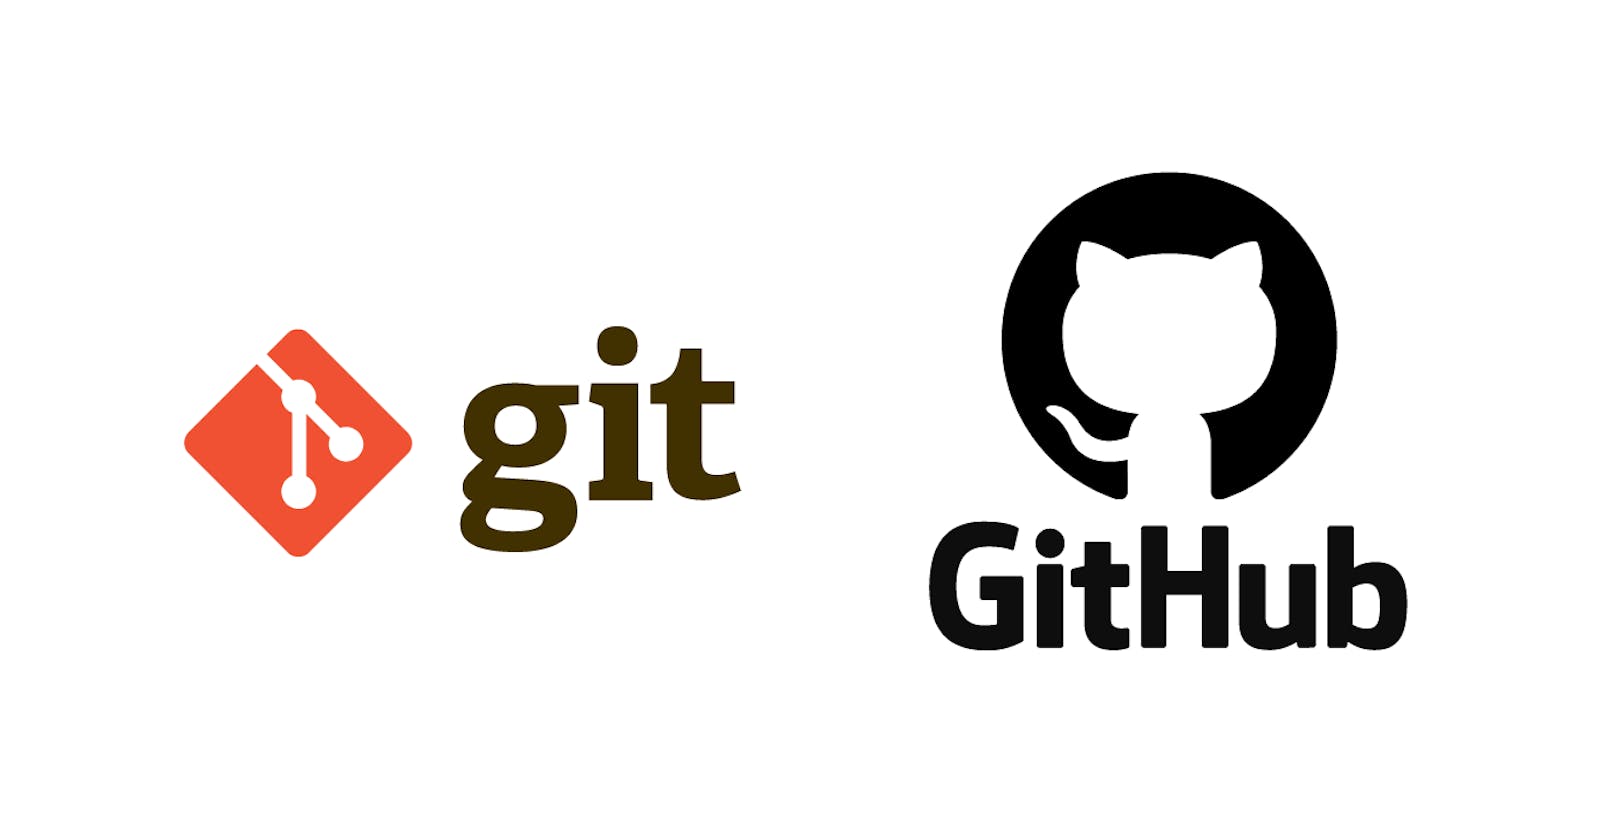 The ultimate guide to Git and GitHub